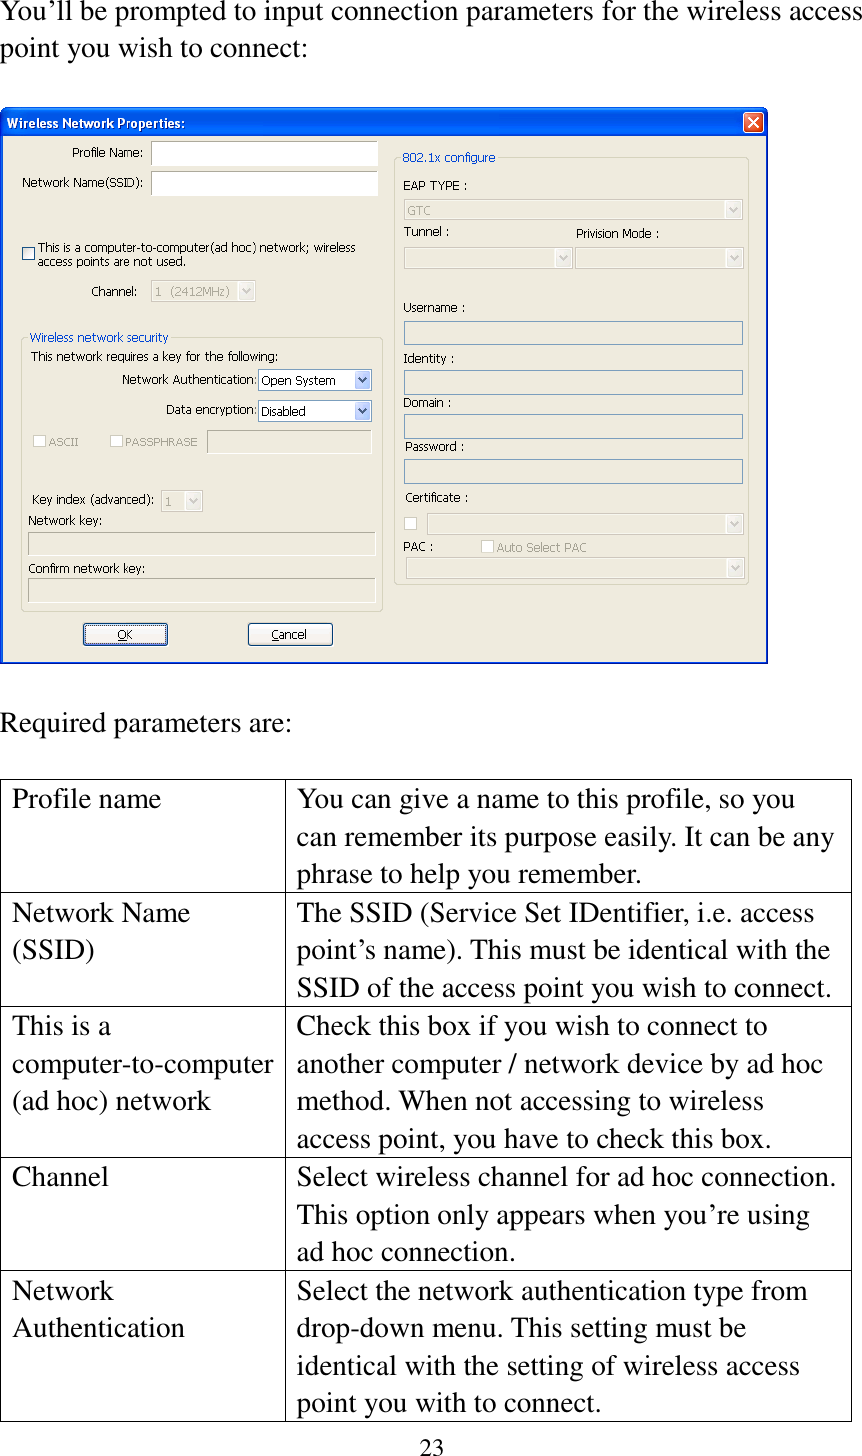 23  You’ll be prompted to input connection parameters for the wireless access point you wish to connect:    Required parameters are:  Profile name You can give a name to this profile, so you can remember its purpose easily. It can be any phrase to help you remember. Network Name (SSID) The SSID (Service Set IDentifier, i.e. access point’s name). This must be identical with the SSID of the access point you wish to connect. This is a computer-to-computer (ad hoc) network Check this box if you wish to connect to another computer / network device by ad hoc method. When not accessing to wireless access point, you have to check this box. Channel Select wireless channel for ad hoc connection. This option only appears when you’re using ad hoc connection. Network   Authentication Select the network authentication type from drop-down menu. This setting must be identical with the setting of wireless access point you with to connect. 